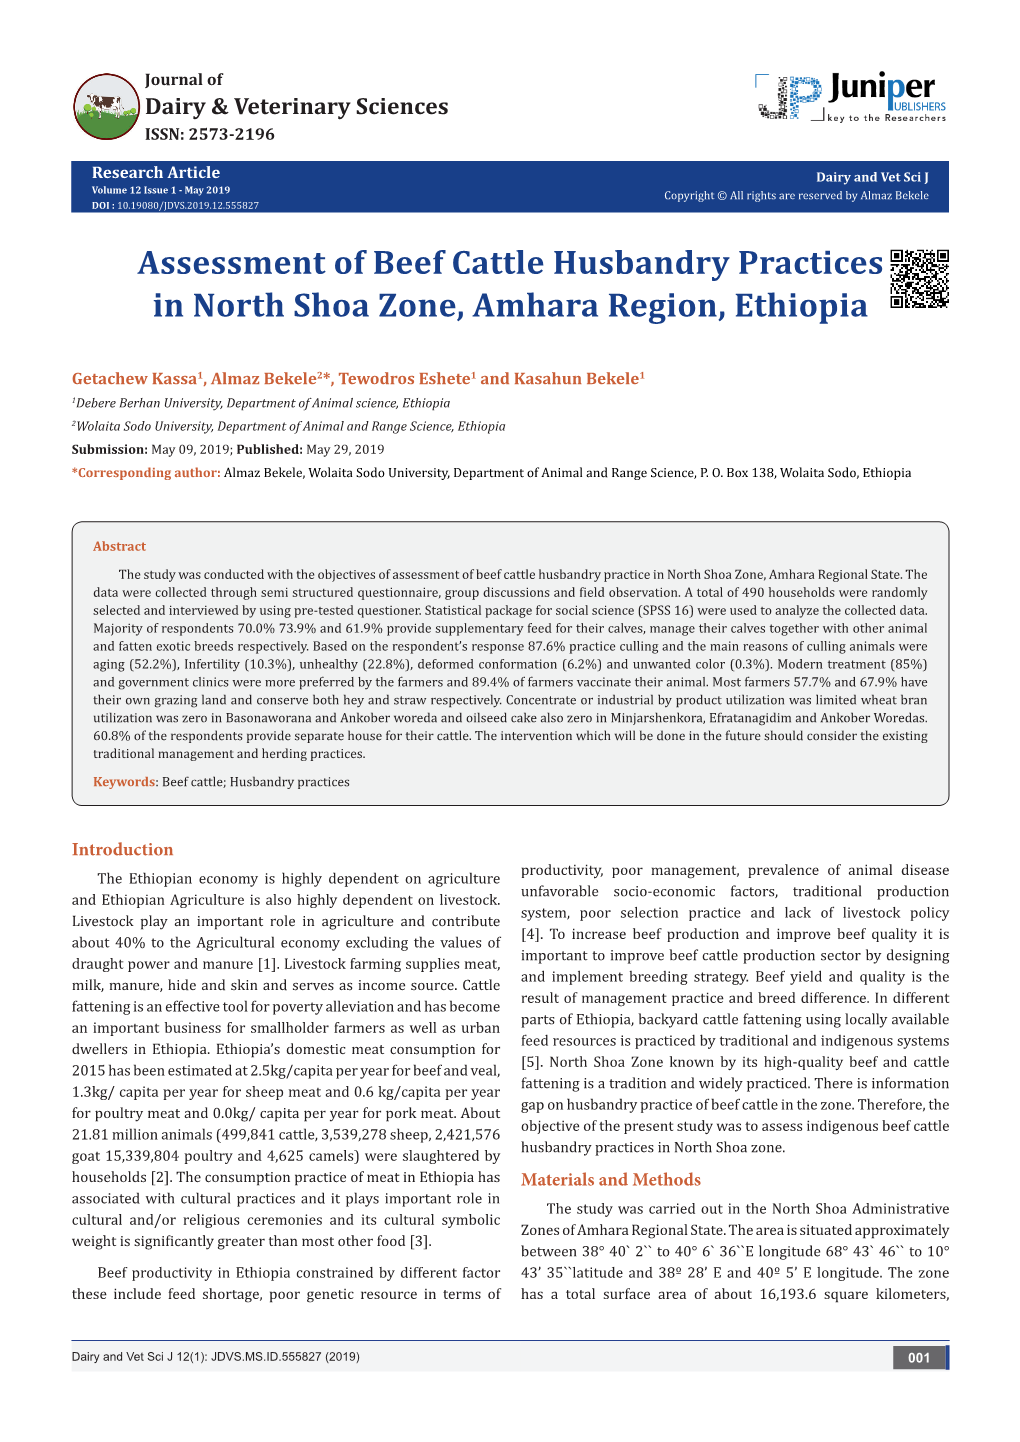 Assessment of Beef Cattle Husbandry Practices in North Shoa Zone, Amhara Region, Ethiopia